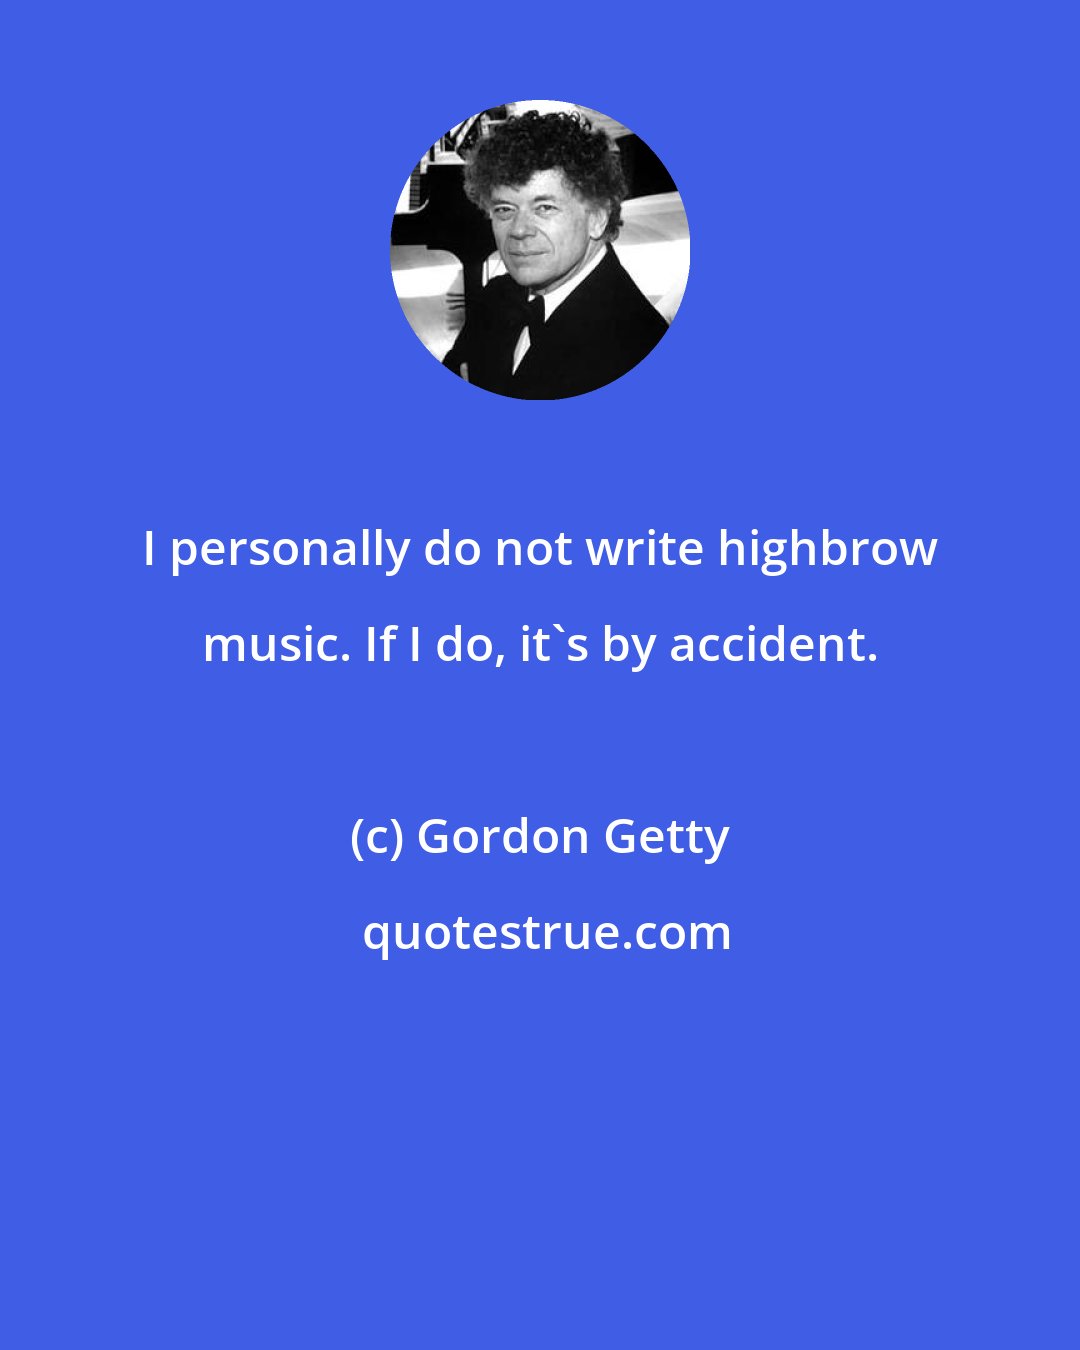 Gordon Getty: I personally do not write highbrow music. If I do, it's by accident.